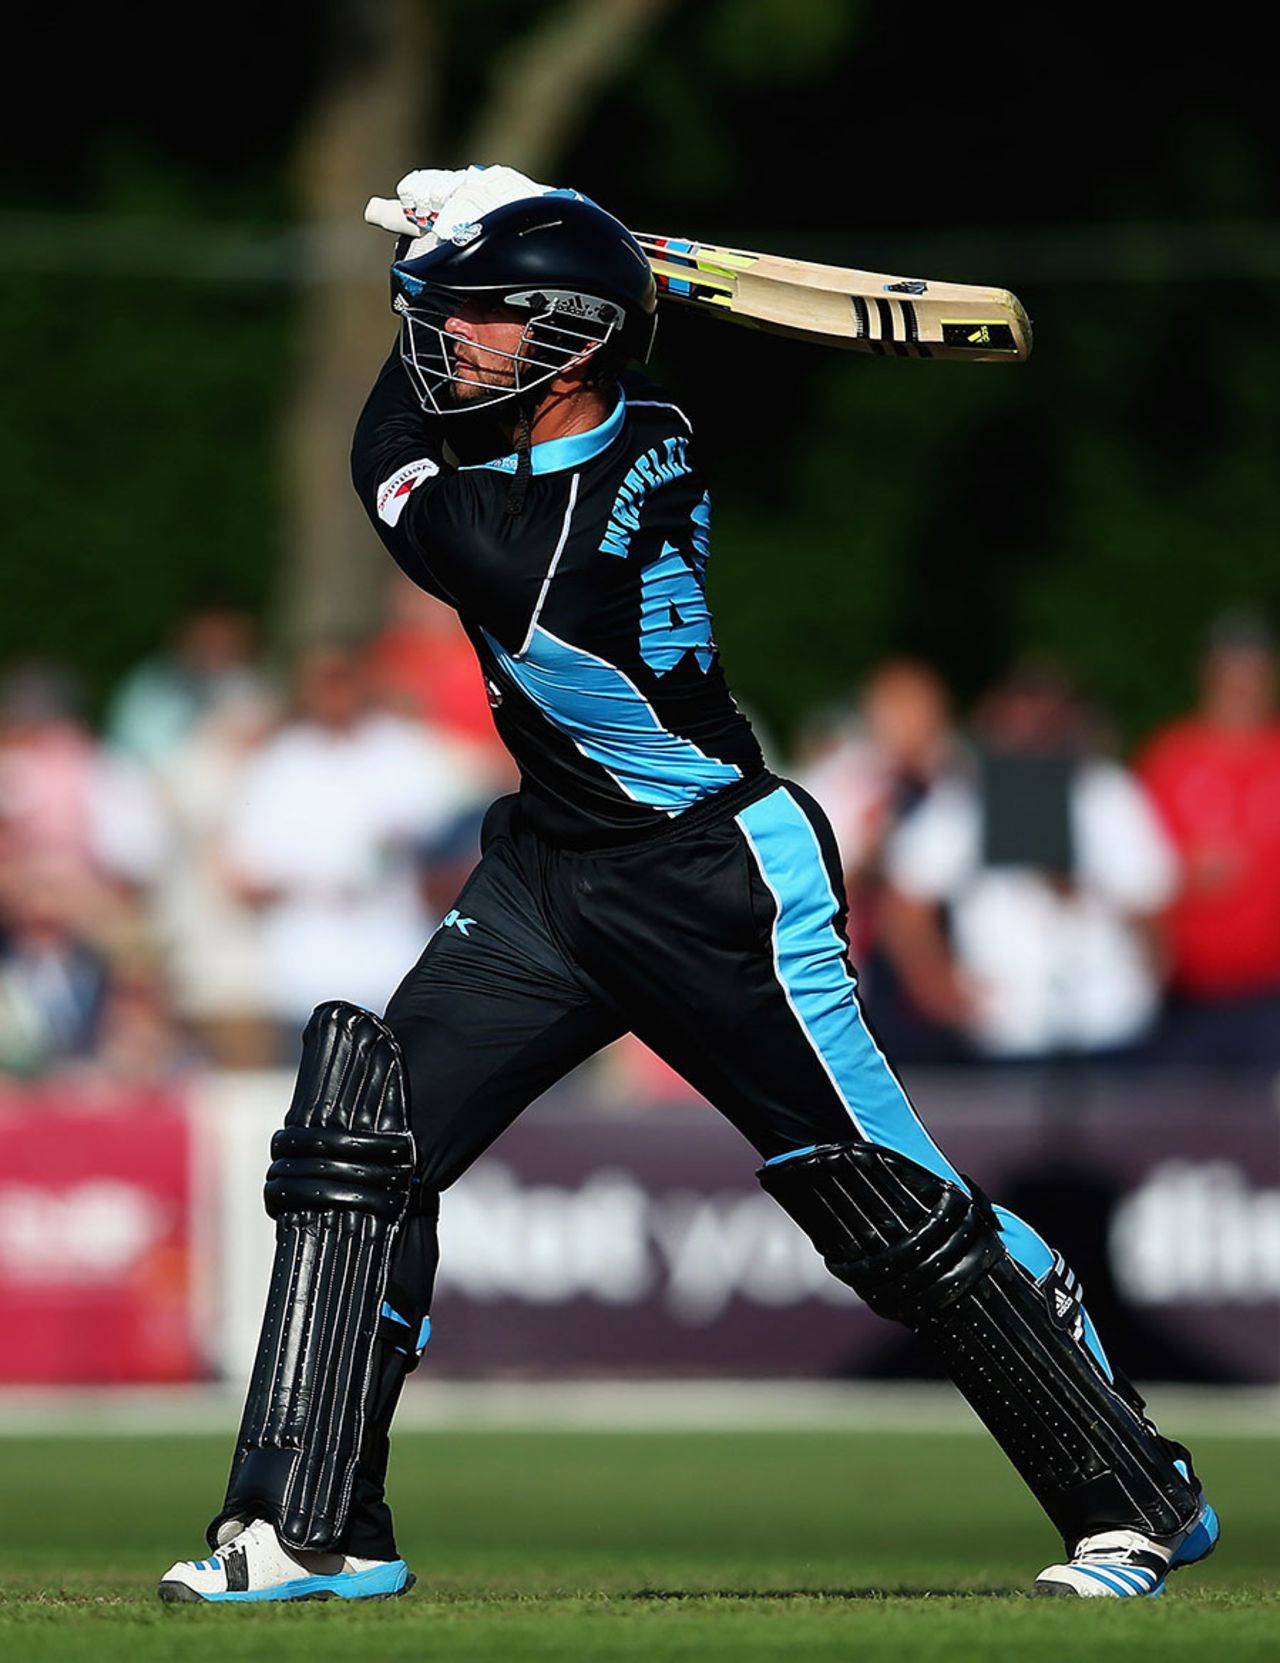 Ross Whitely smashed nine sixes in his 84 in just 38 balls. Worcestershire v Derbyshire, NatWest T20, New Road, July 25, 2014